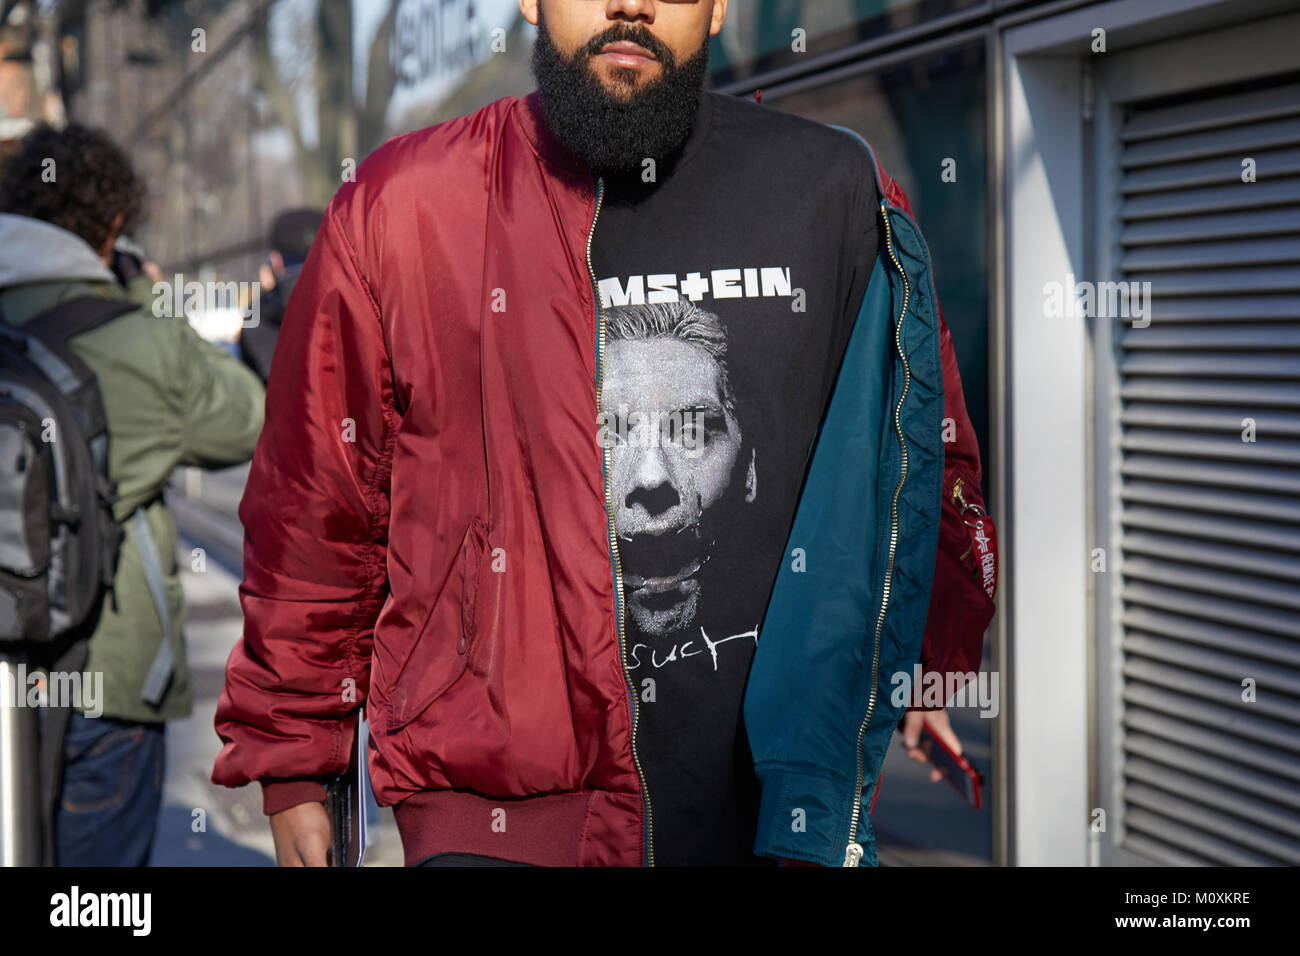 MILAN - JANUARY 13: Man with dark red bomber jacket and Rammstein shirt before Emporio Armani fashion show, Milan Fashion Week street style on January Stock Photo